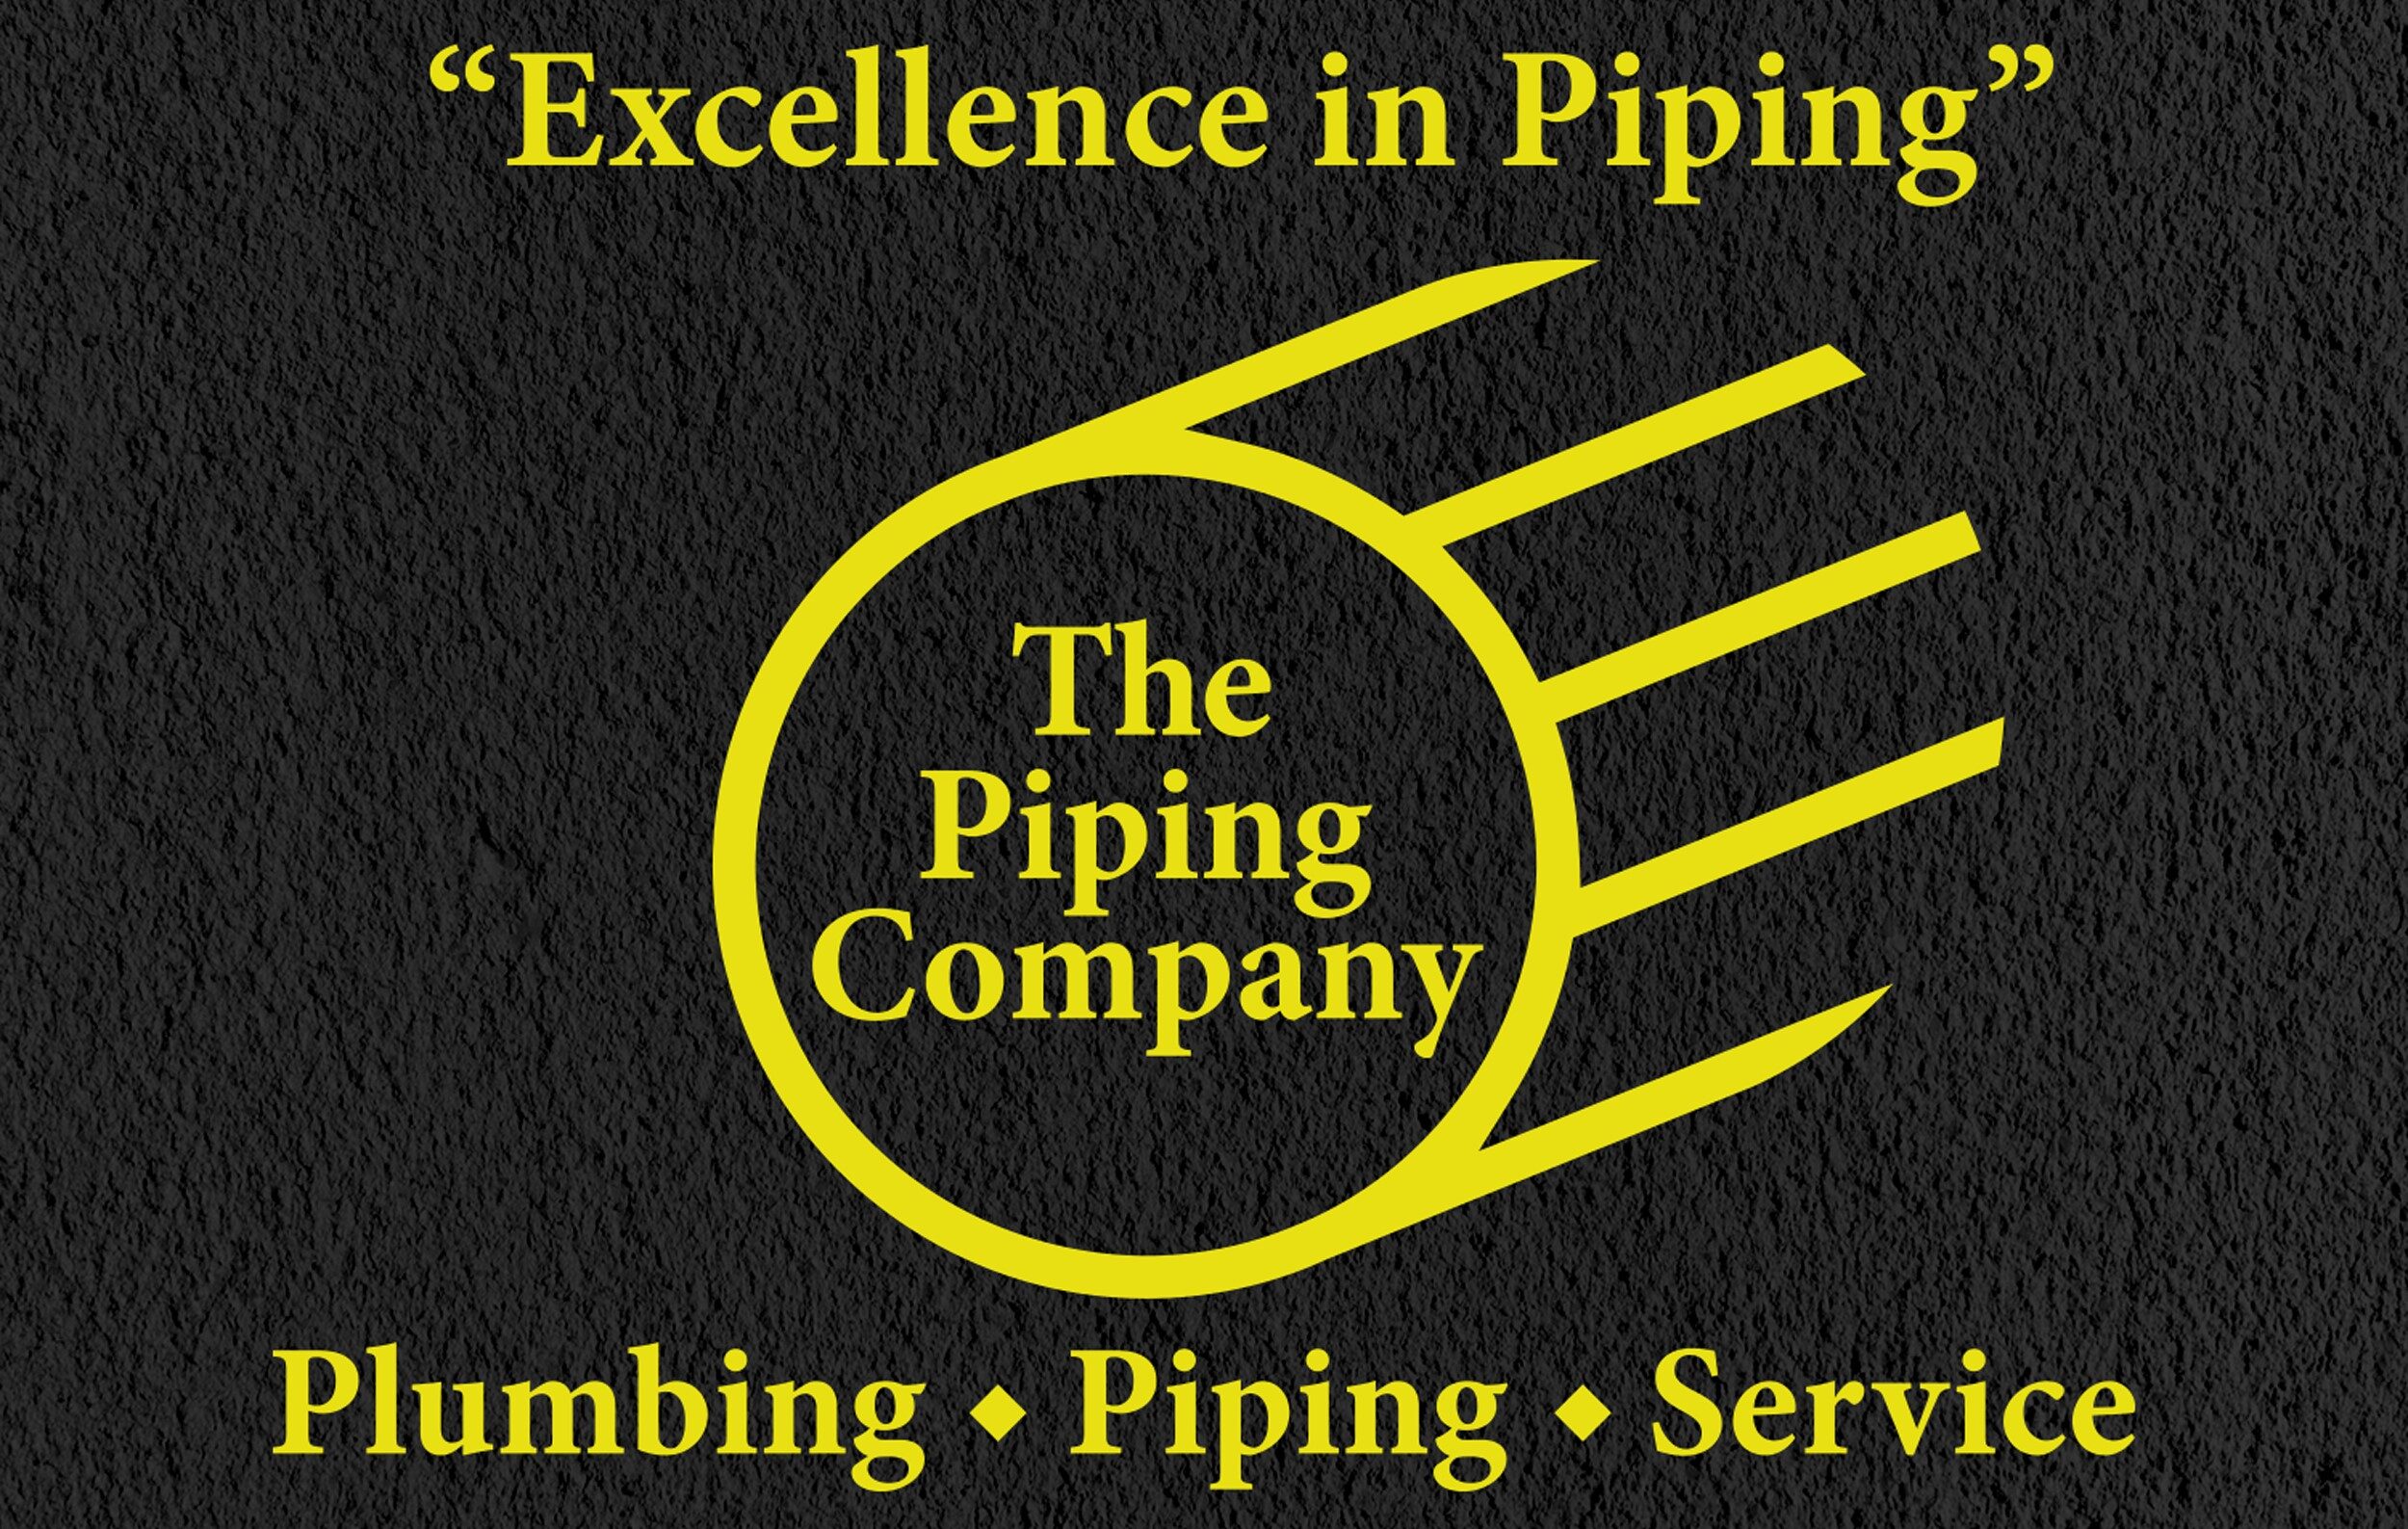 The Piping Company